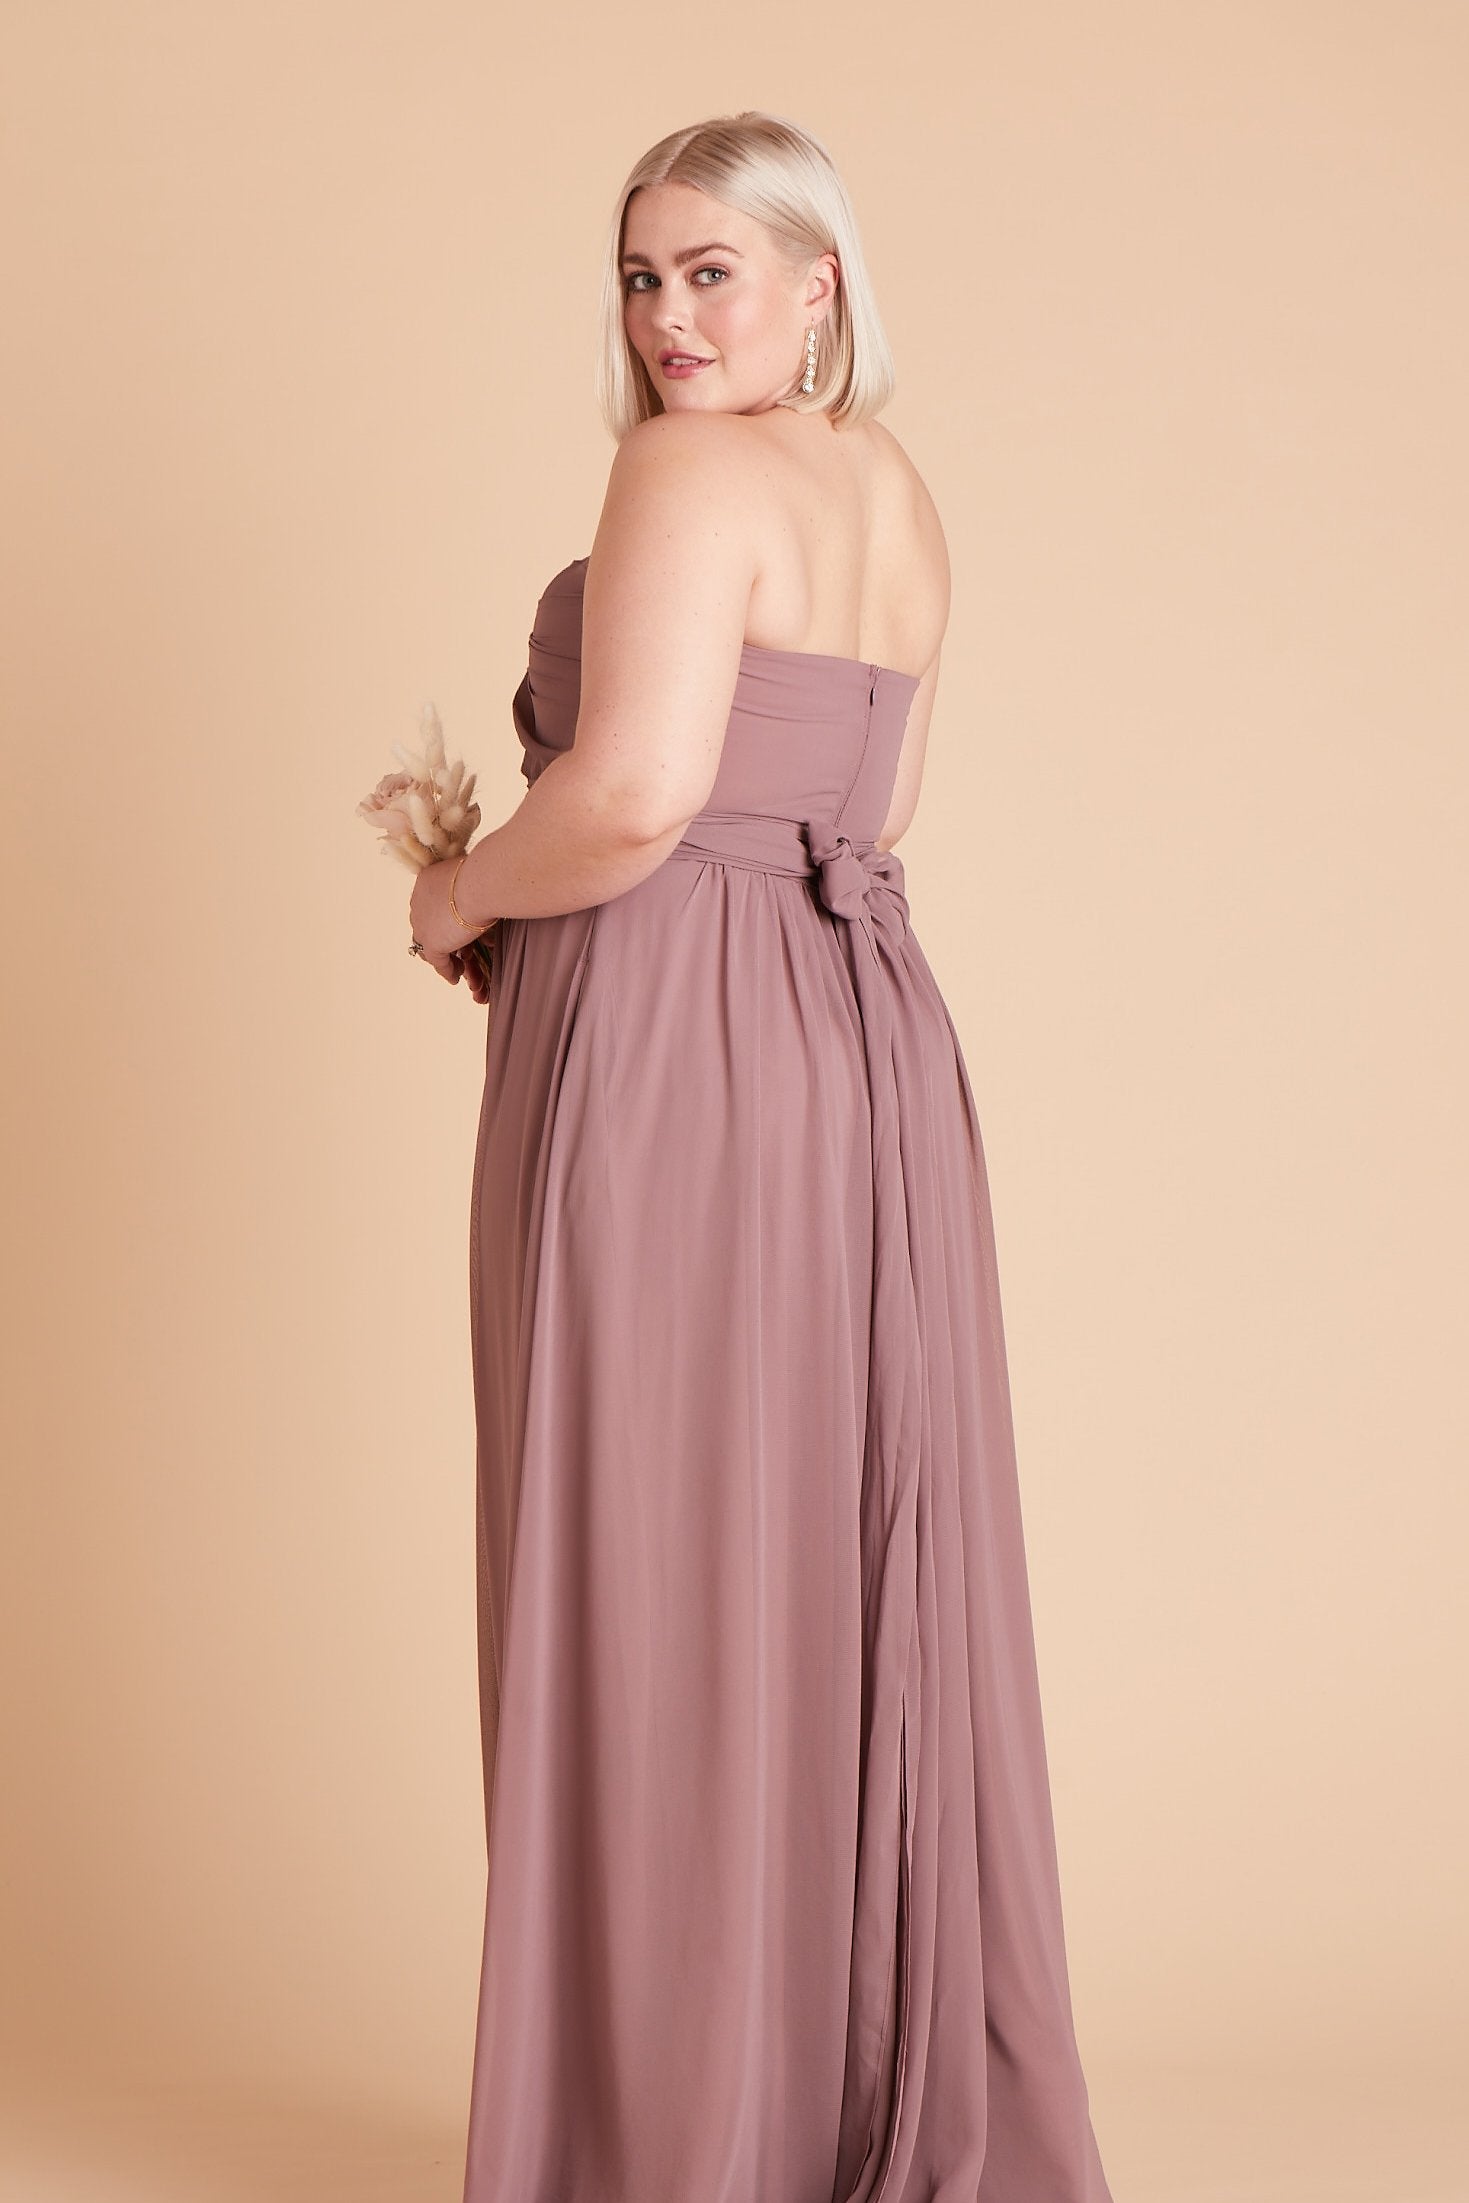 Grace convertible plus size bridesmaid dress in dark mauve chiffon by Birdy Grey, side view